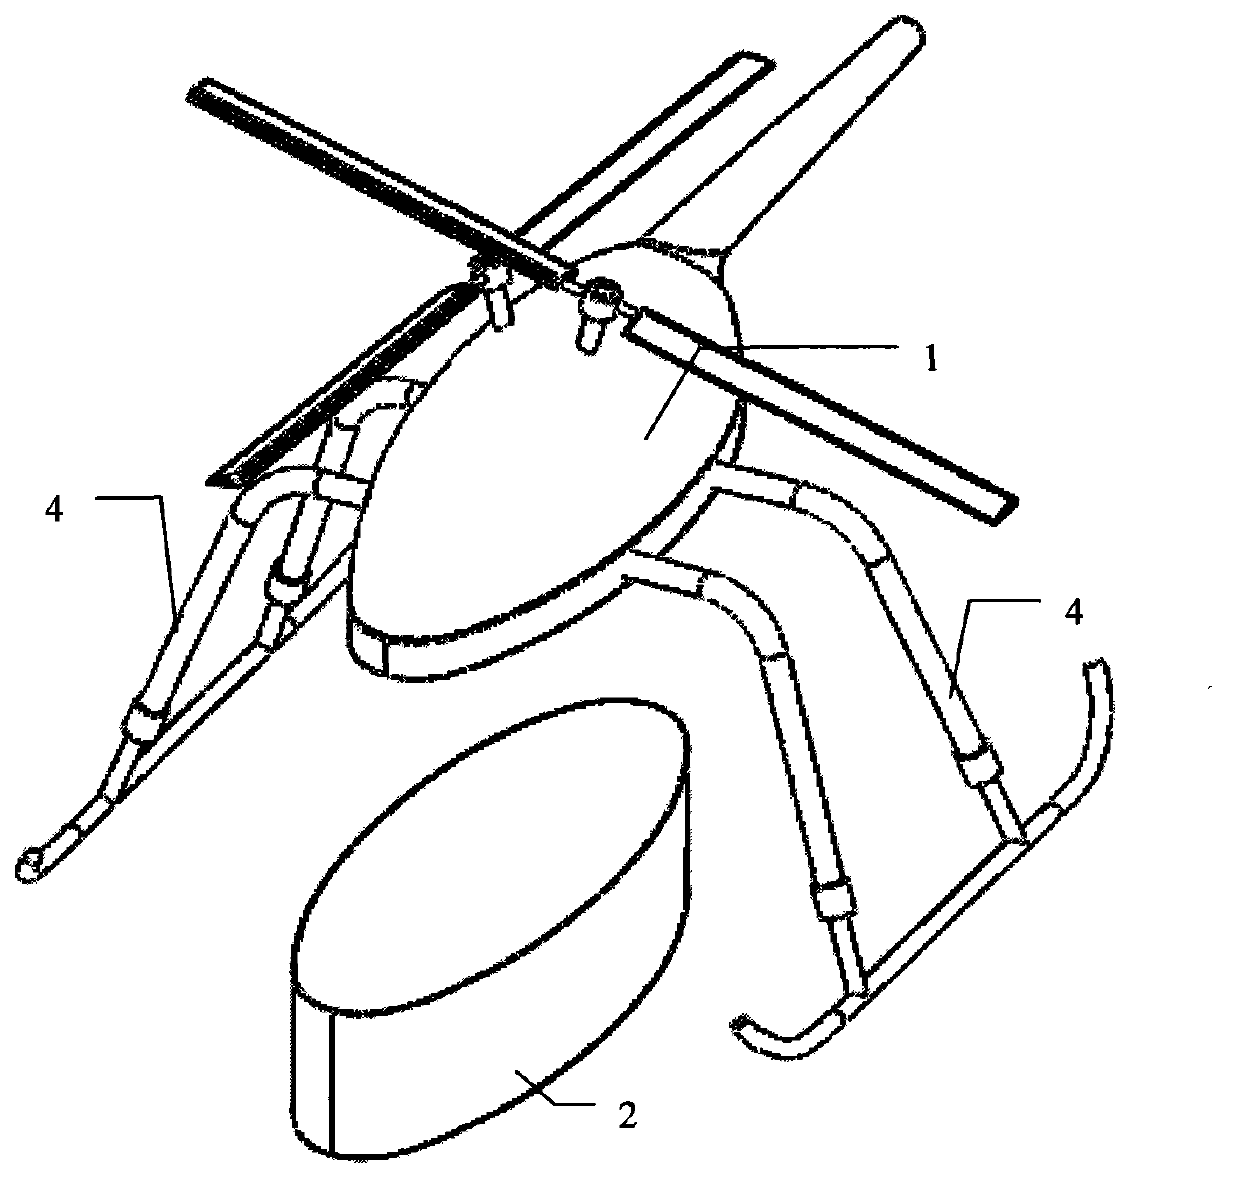 Modularized pilotless helicopter for task loads